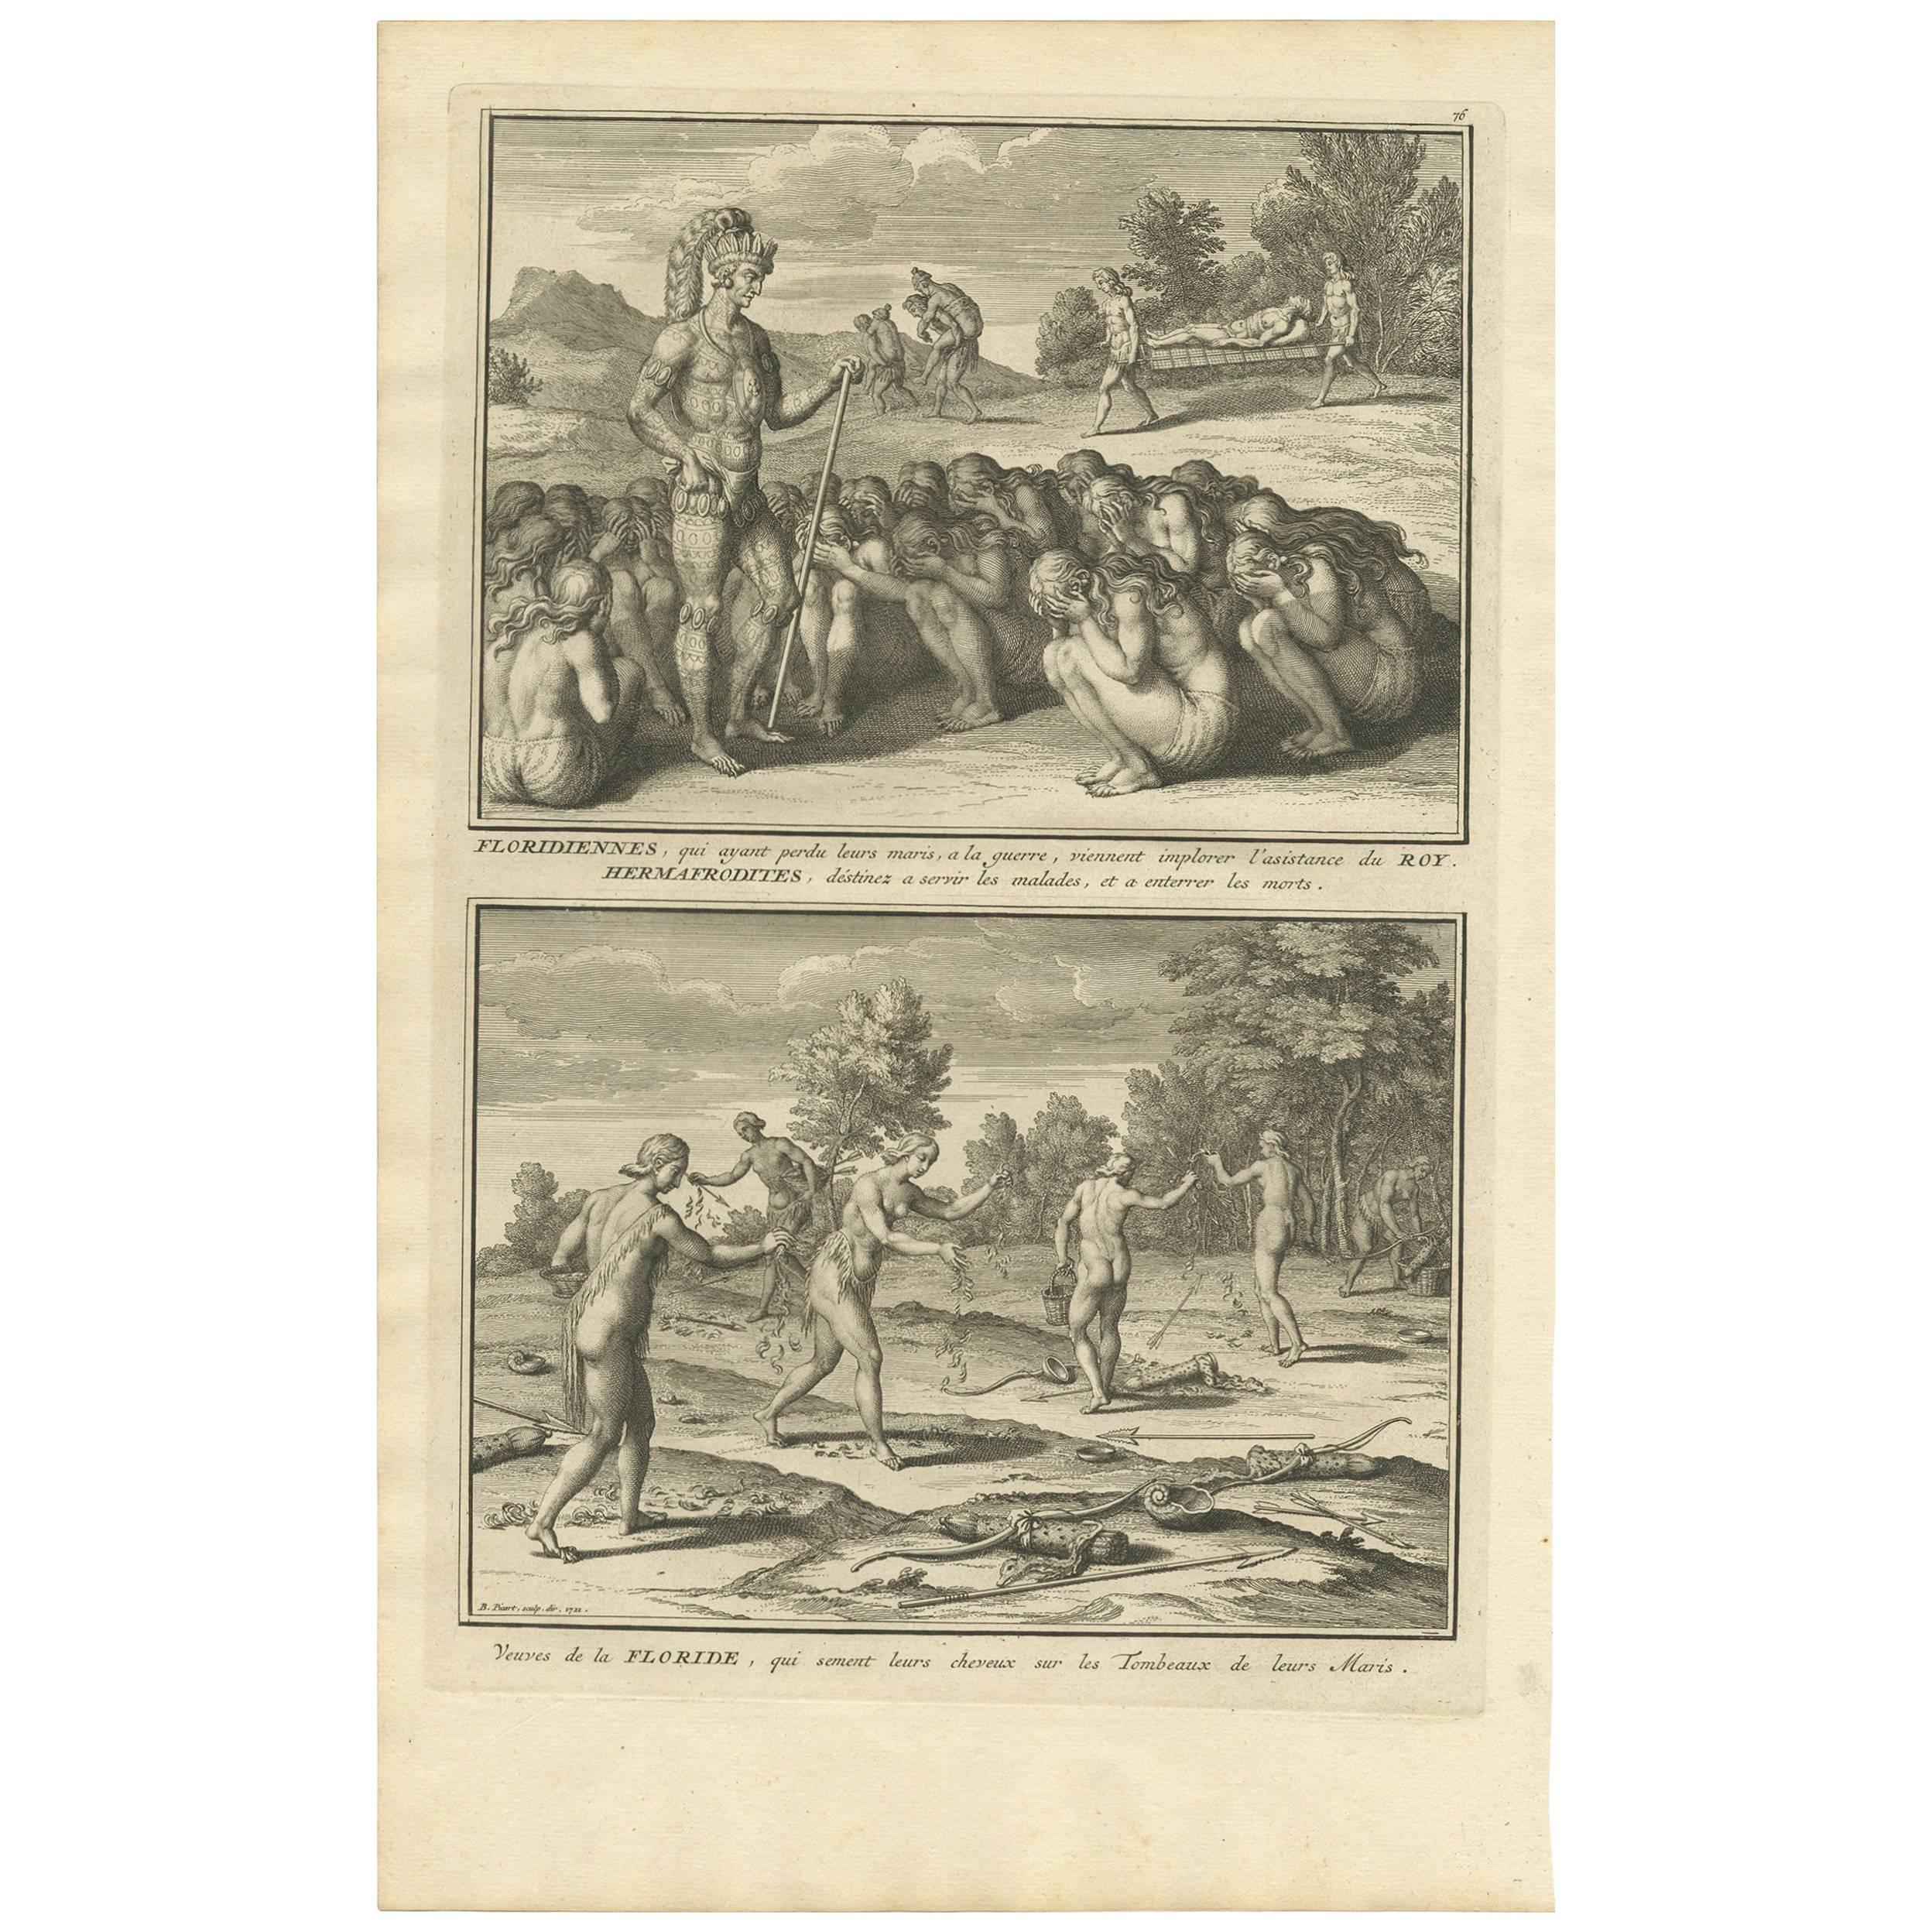 Antique Print of Widows in Florida by B. Picart, 1721